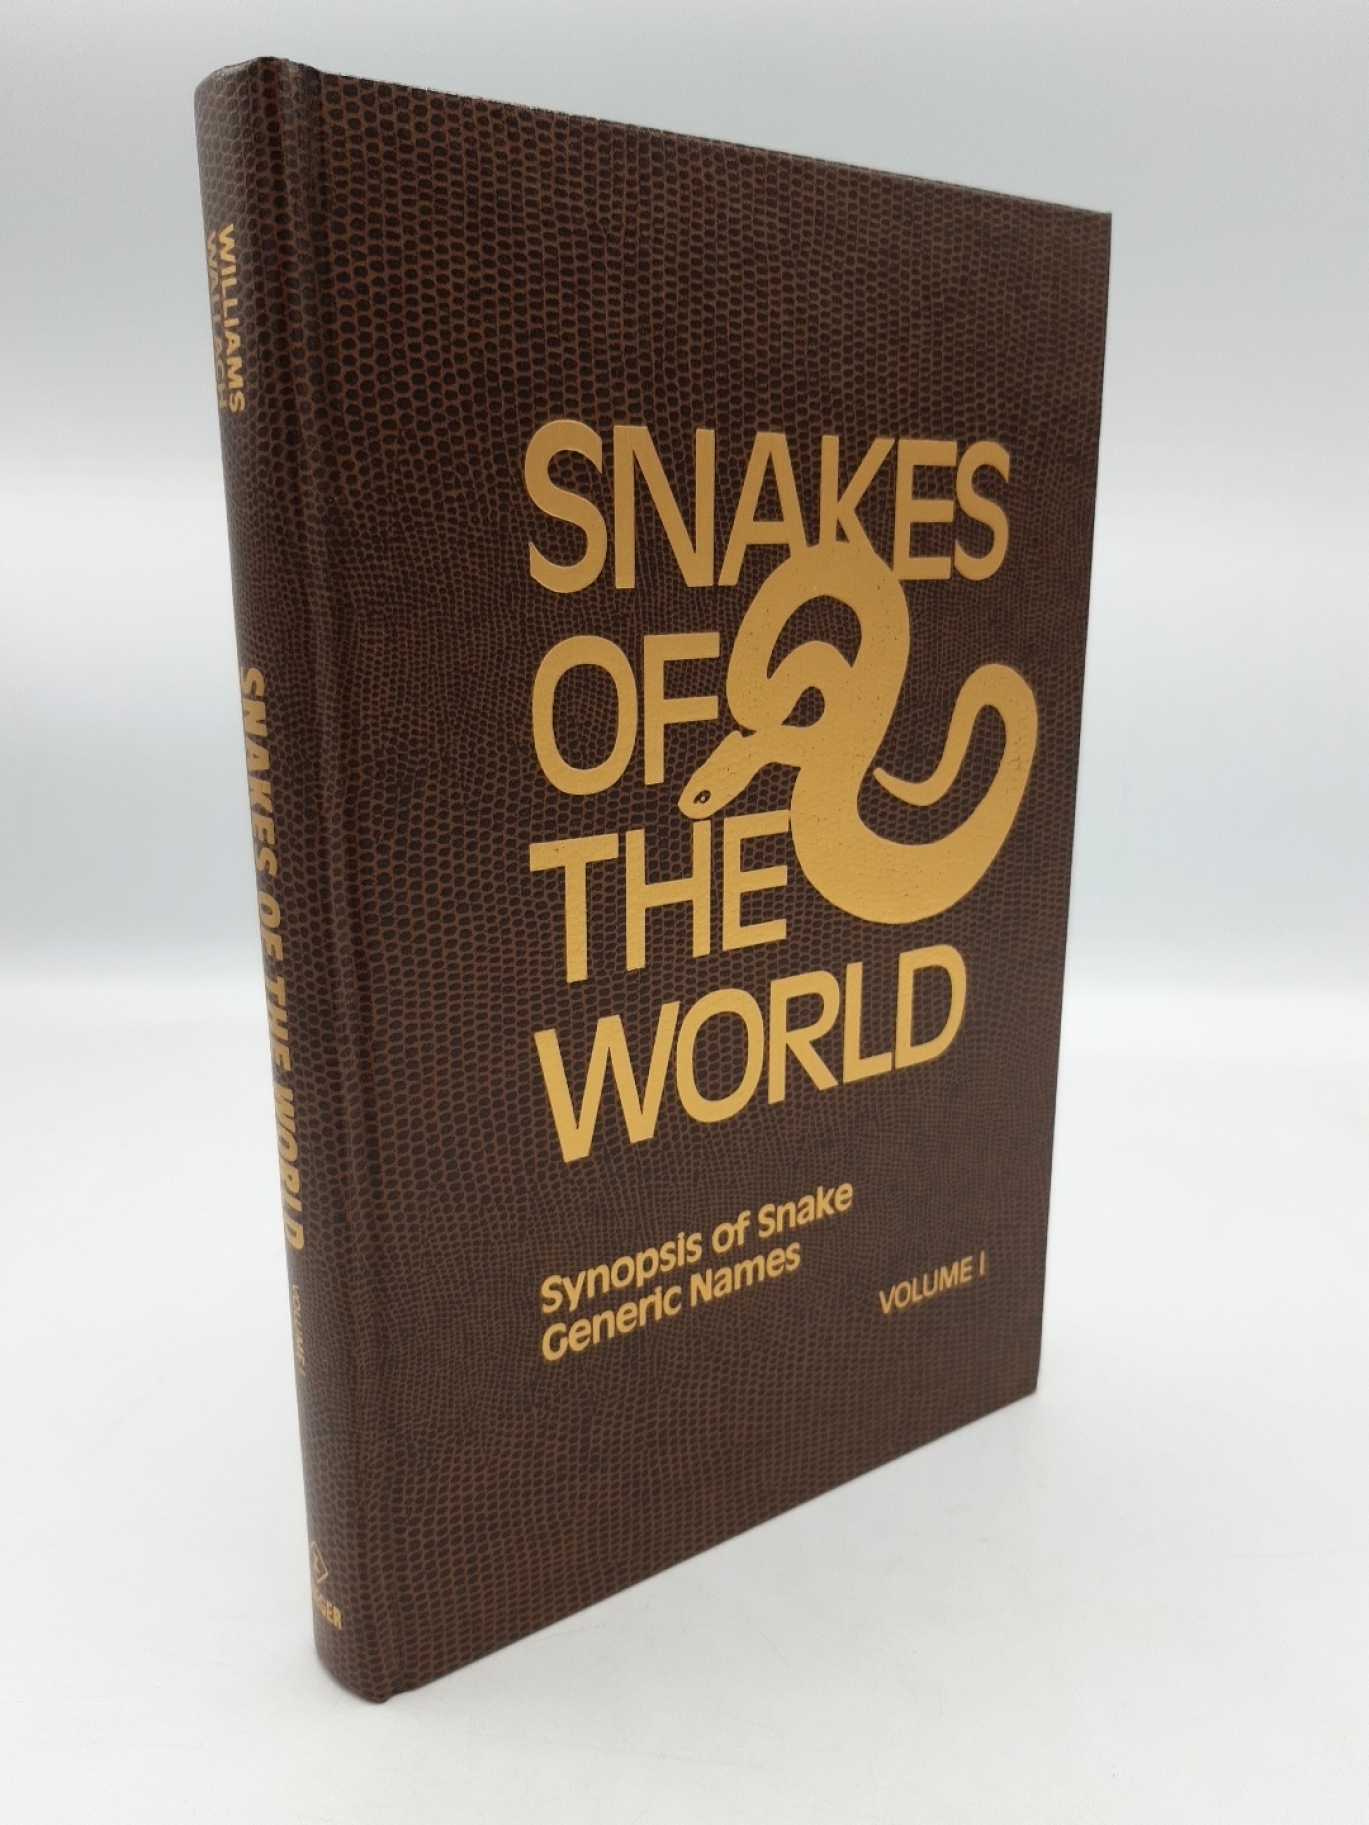 Williams, Kenneth L.: Snakes of the world. Vol. 1 synopsis of snake generic names